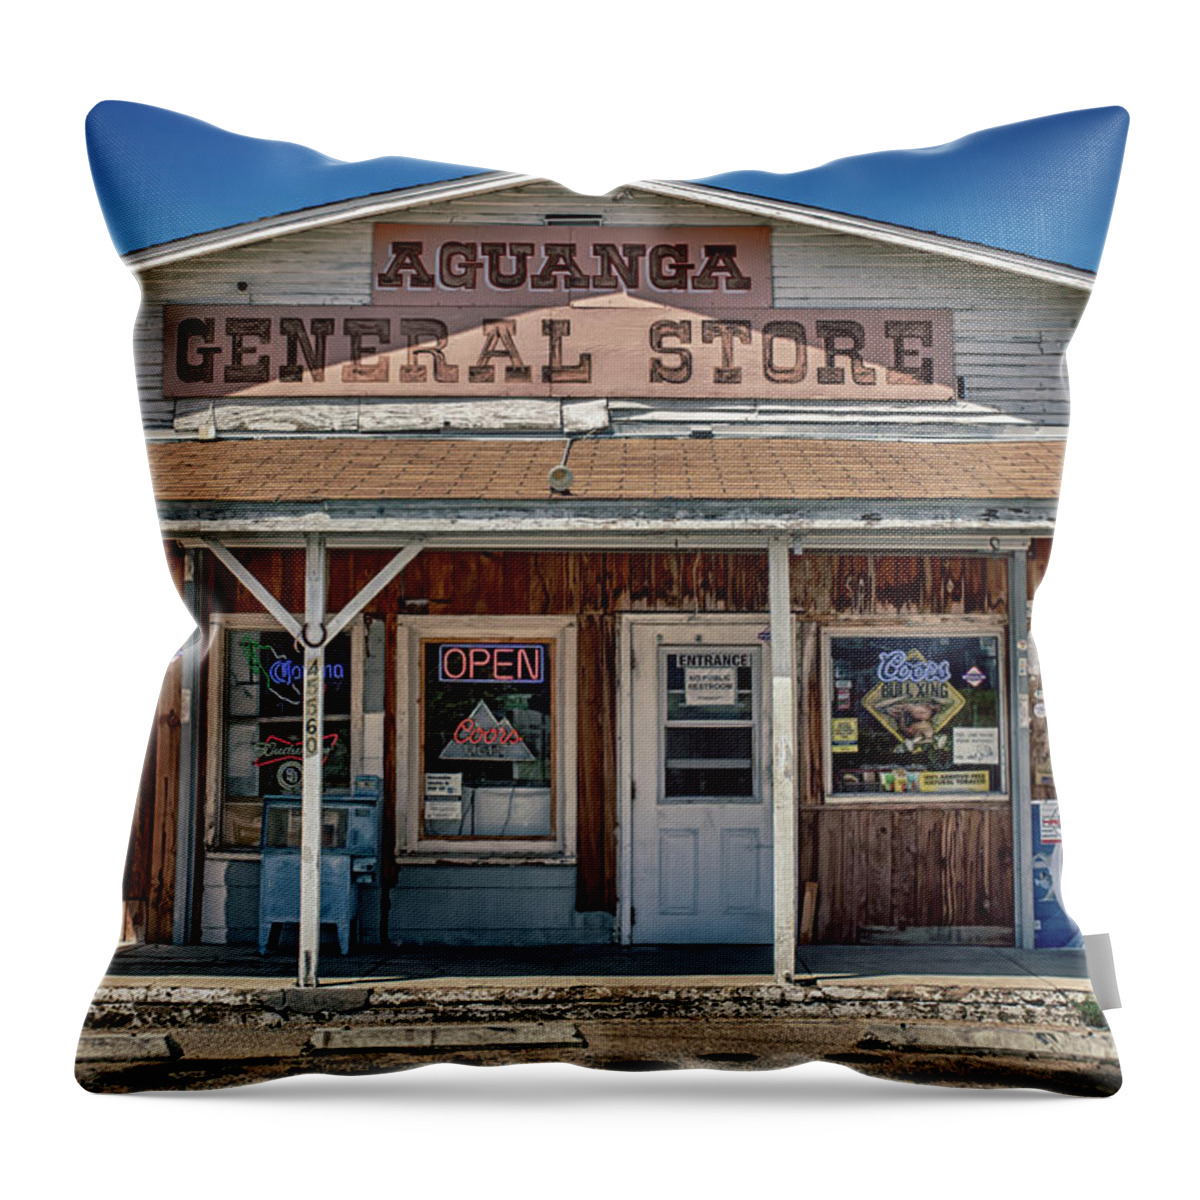 General Store Throw Pillow featuring the photograph Aguanga General Store by Alison Frank